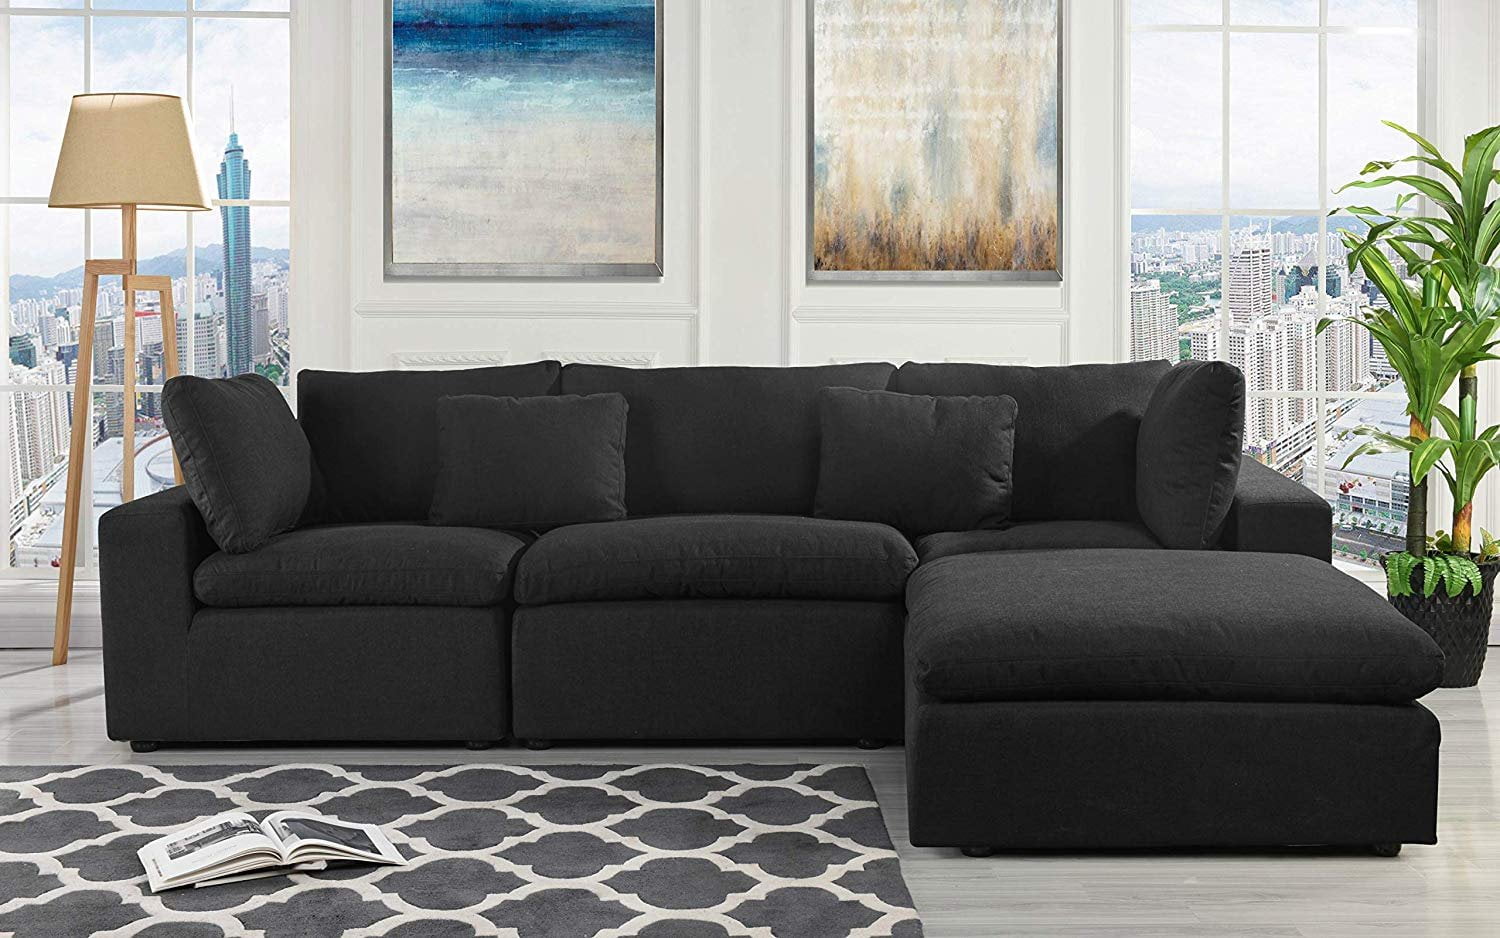 Classic Large Linen Fabric Sectional Sofa, L Shape Couch with Wide Chaise  (Black) - Walmart.com